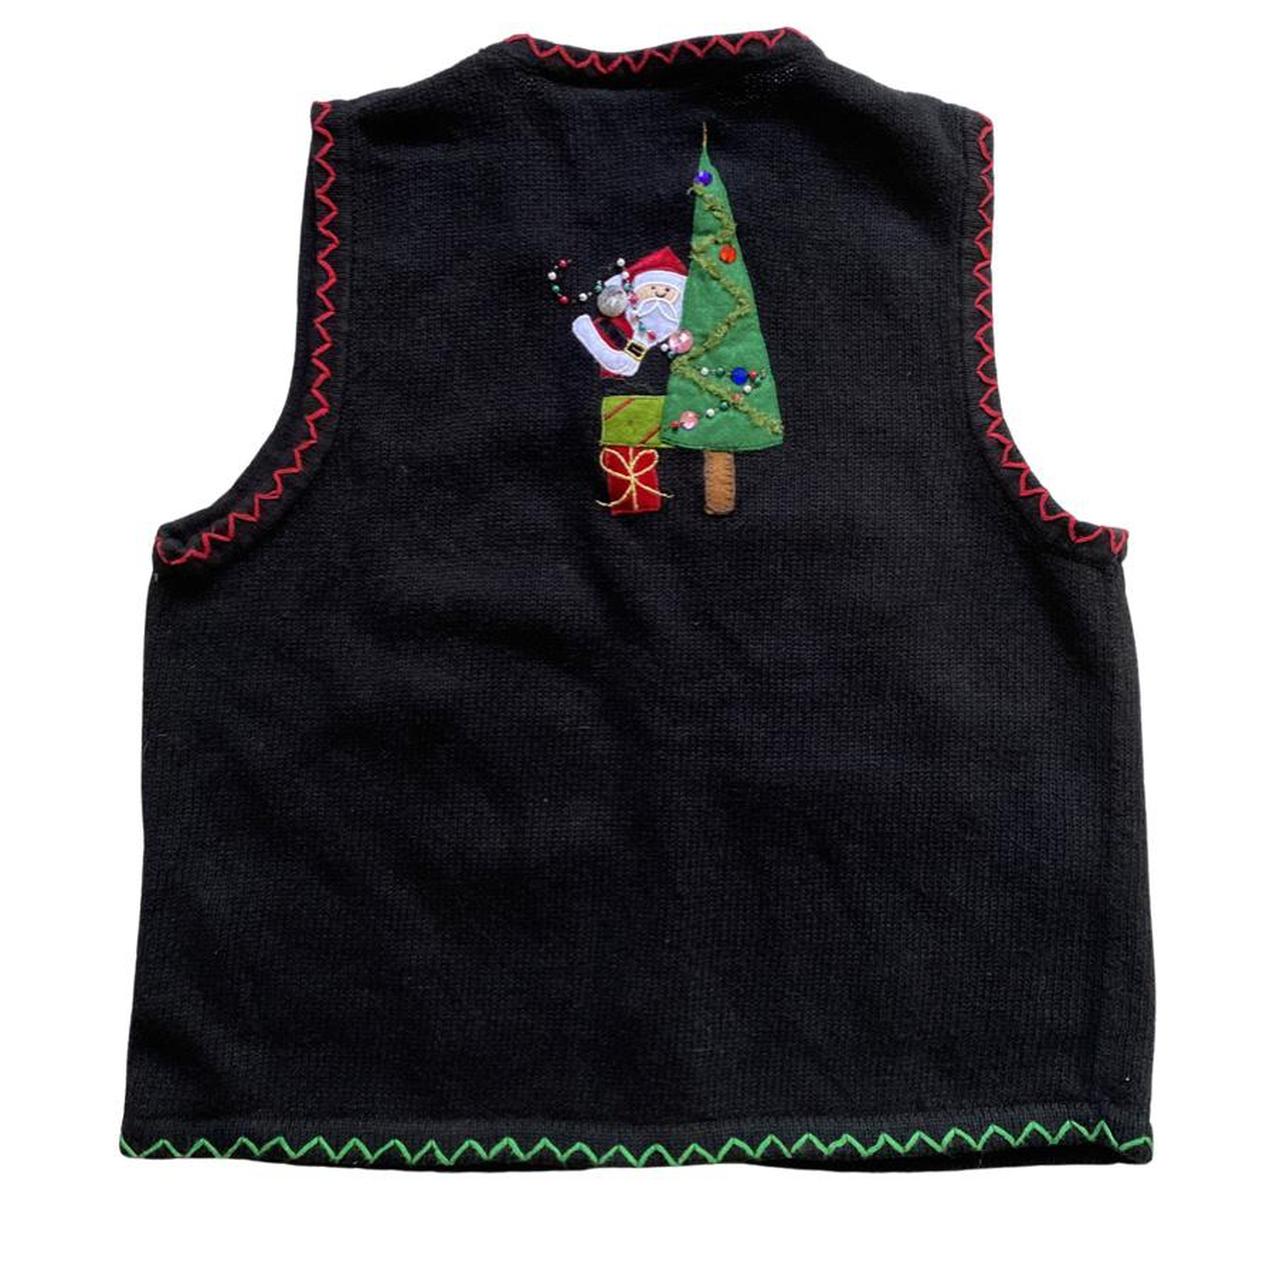 Product Image 2 - Black vintage Christmas knitted sweater